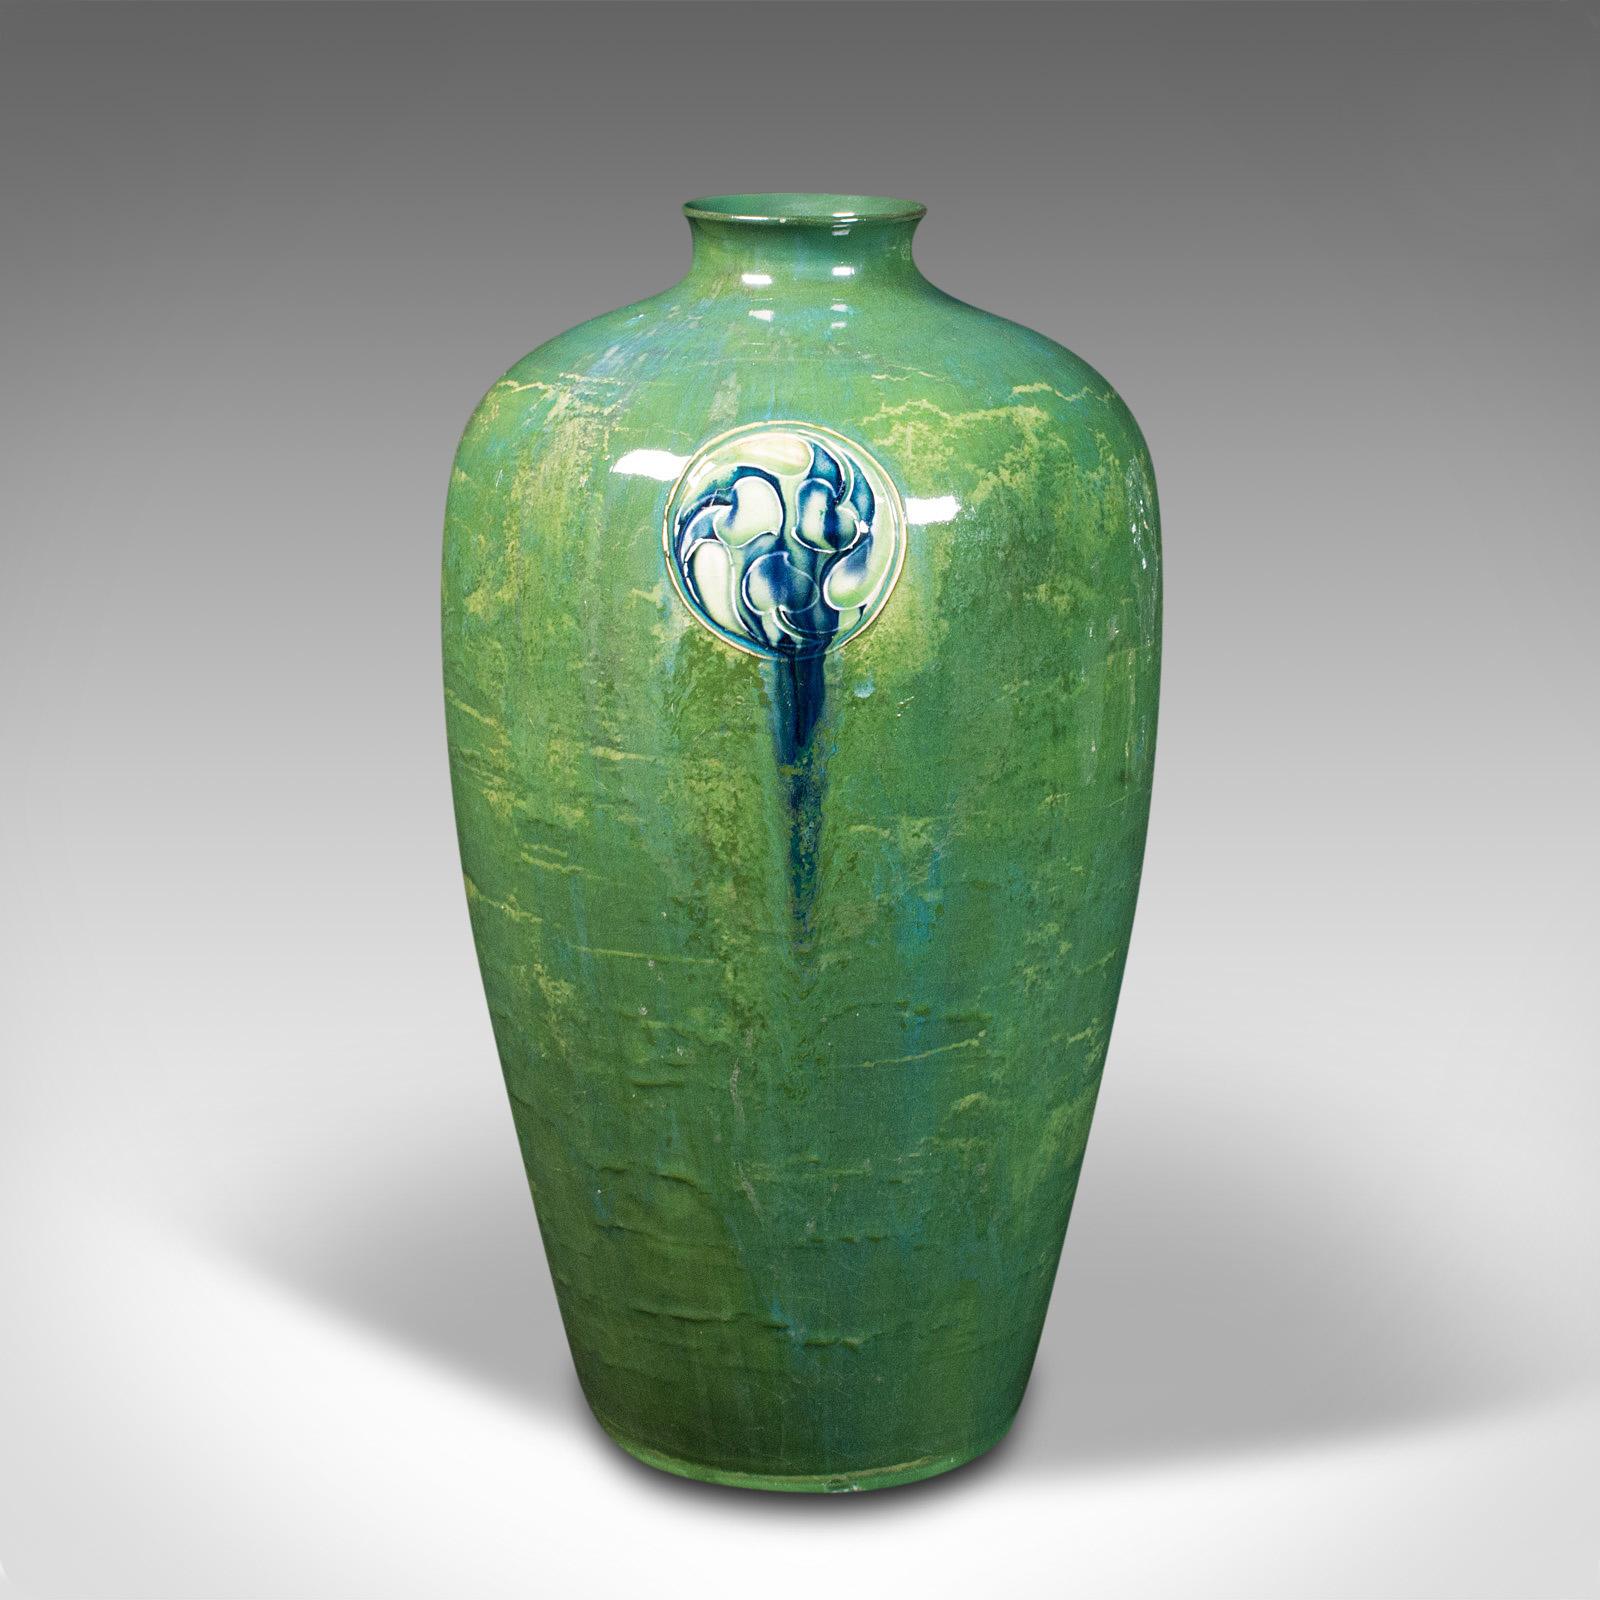 This is an antique Flaminian vase. An English, ceramic baluster flower vase in Art Nouveau taste by William Moorcroft (1872-1945) for Liberty of London, dating to the Edwardian period, circa 1910.

Striking example of Edwardian art